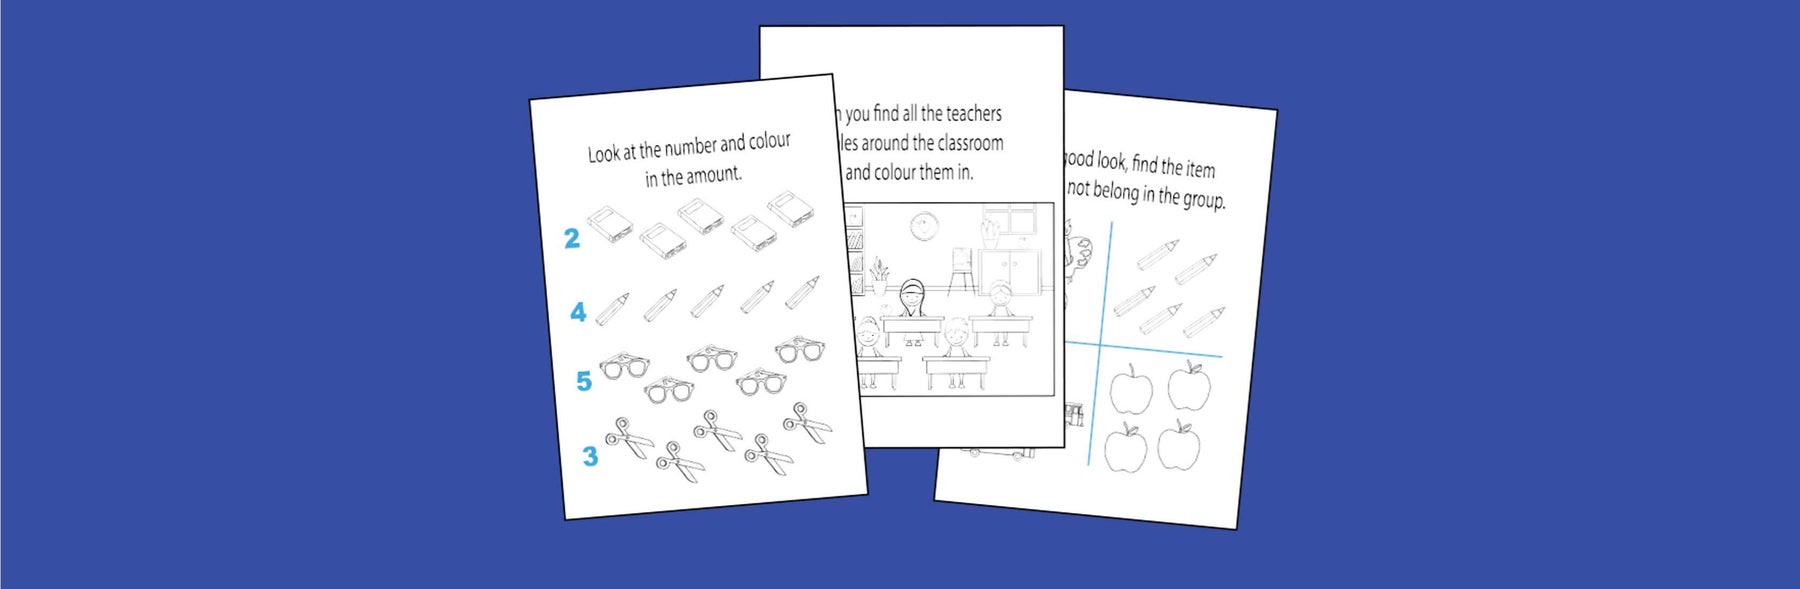 Pages from the activity book.